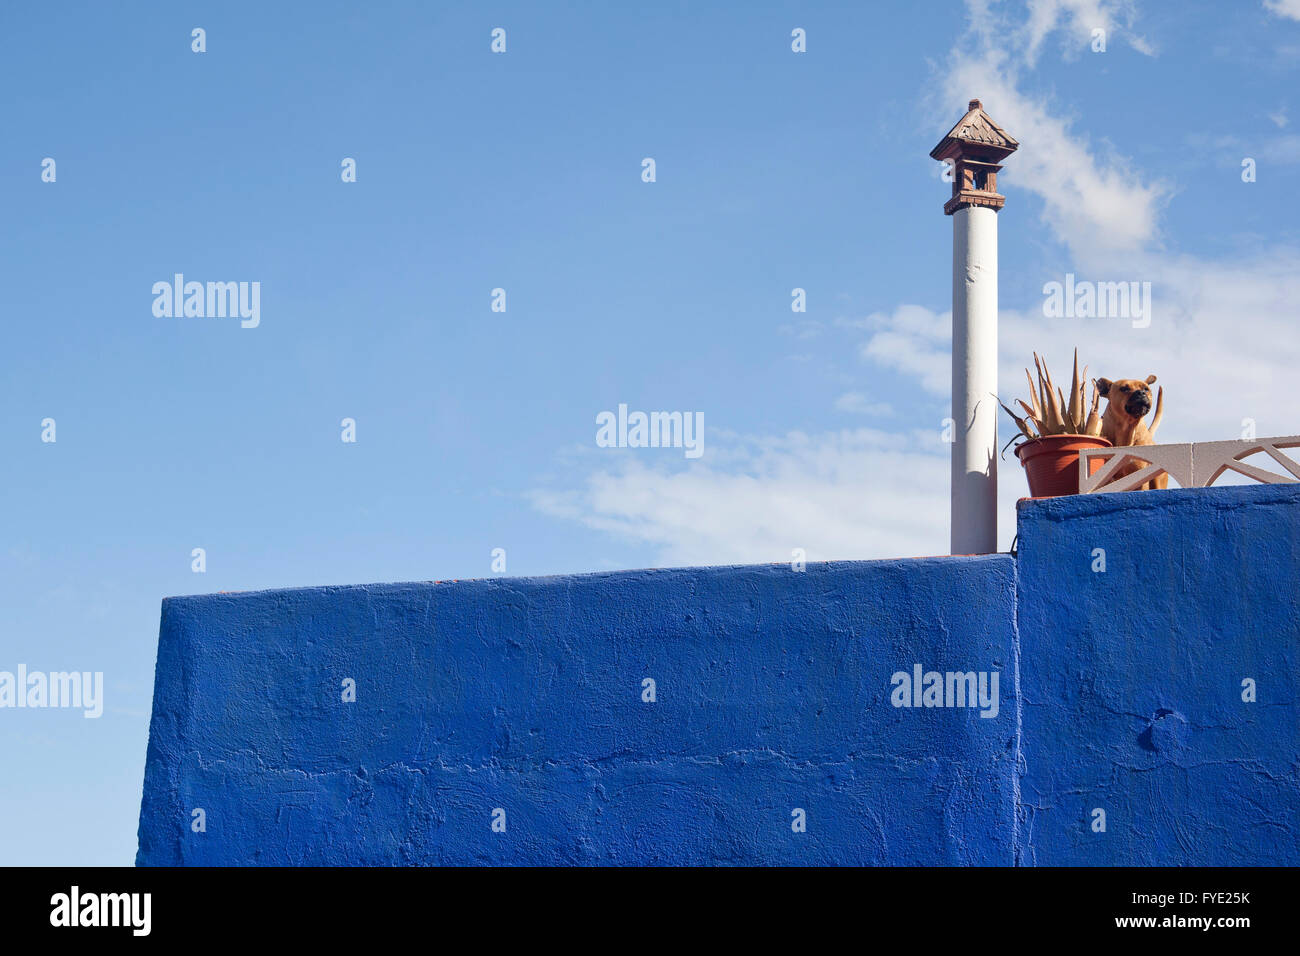 Blue facade with a dog at the terrace outdoors Stock Photo